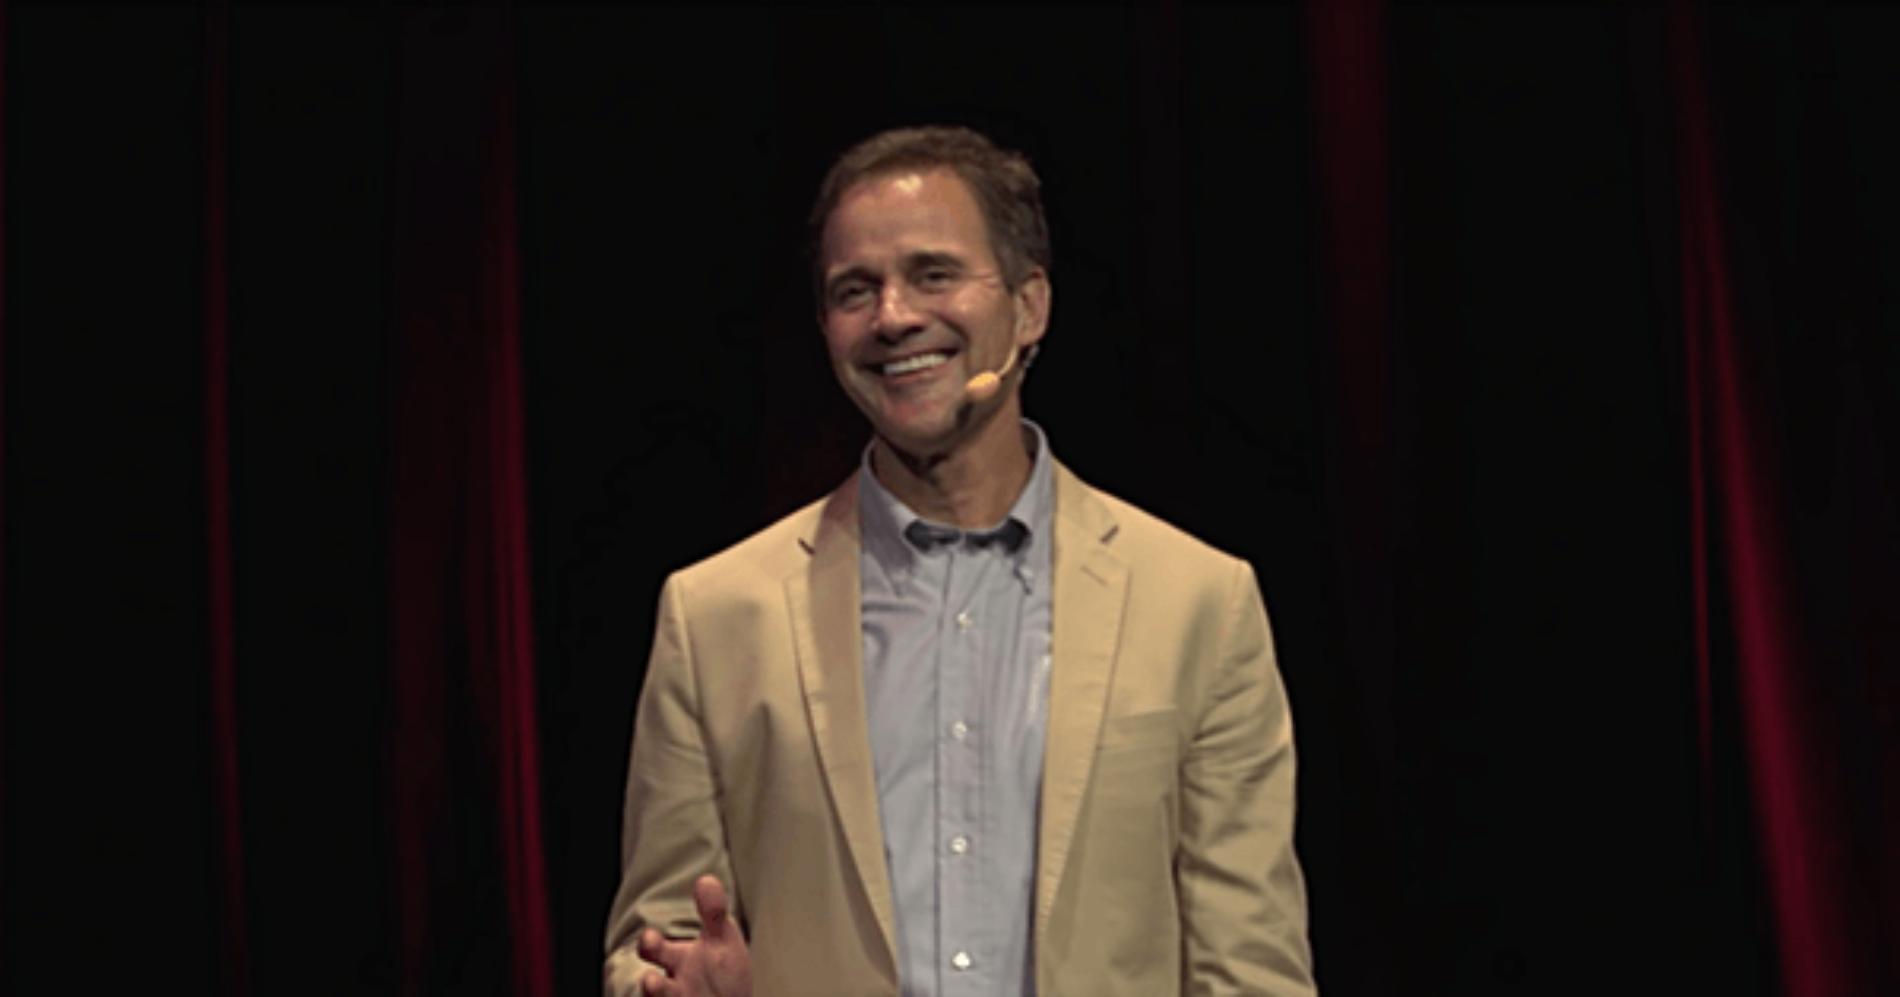 WATCH: This Father Explains Why Homosexuality is About Survival Not Sex in Powerful TED Talk